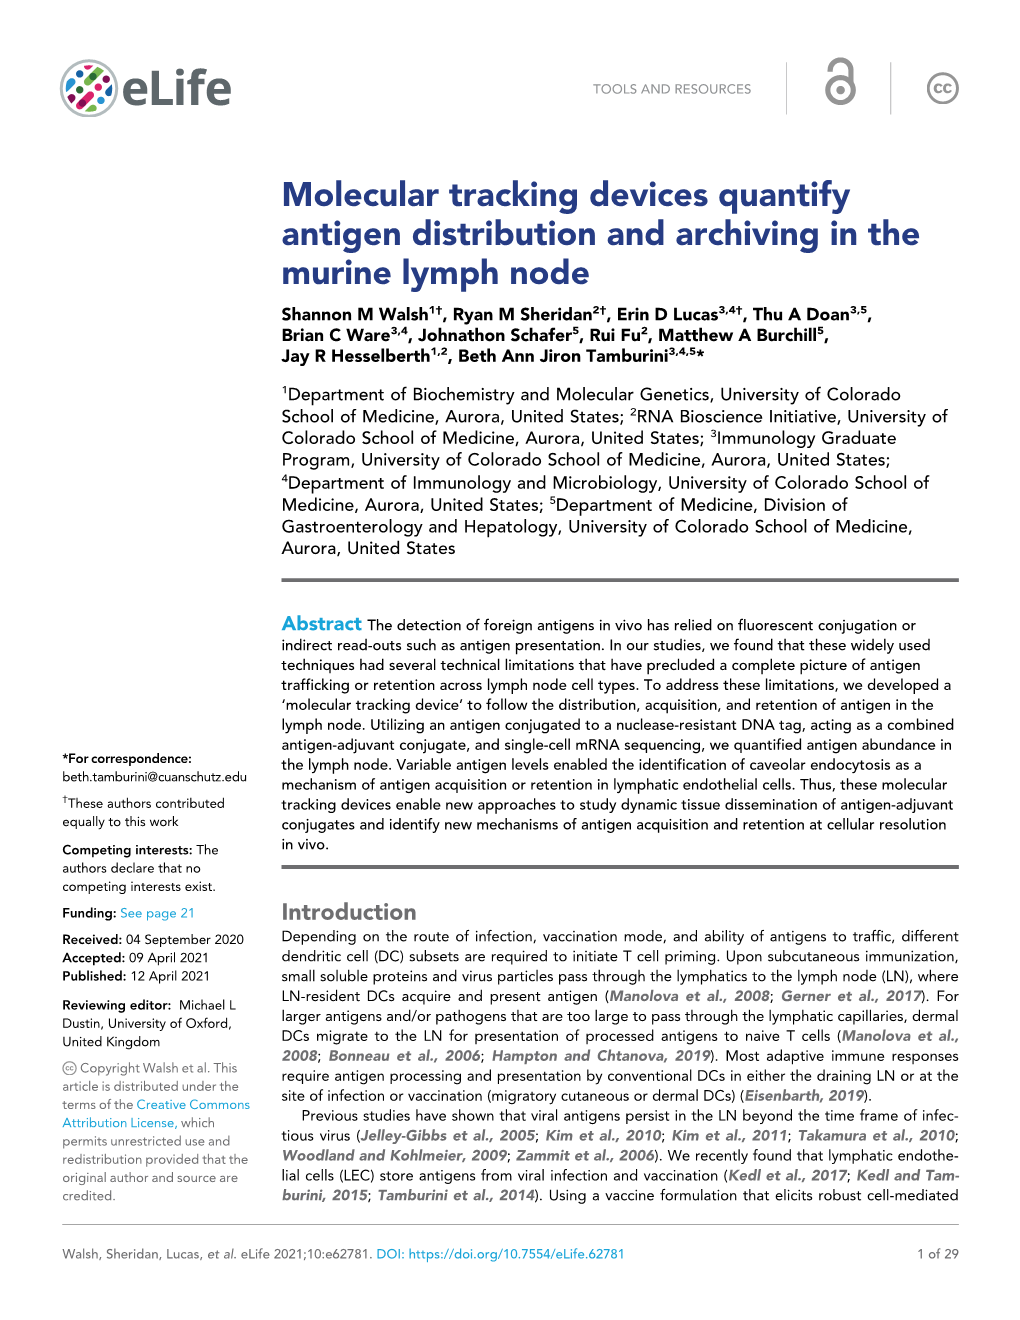 Molecular Tracking Devices Quantify Antigen Distribution and Archiving in the Murine Lymph Node